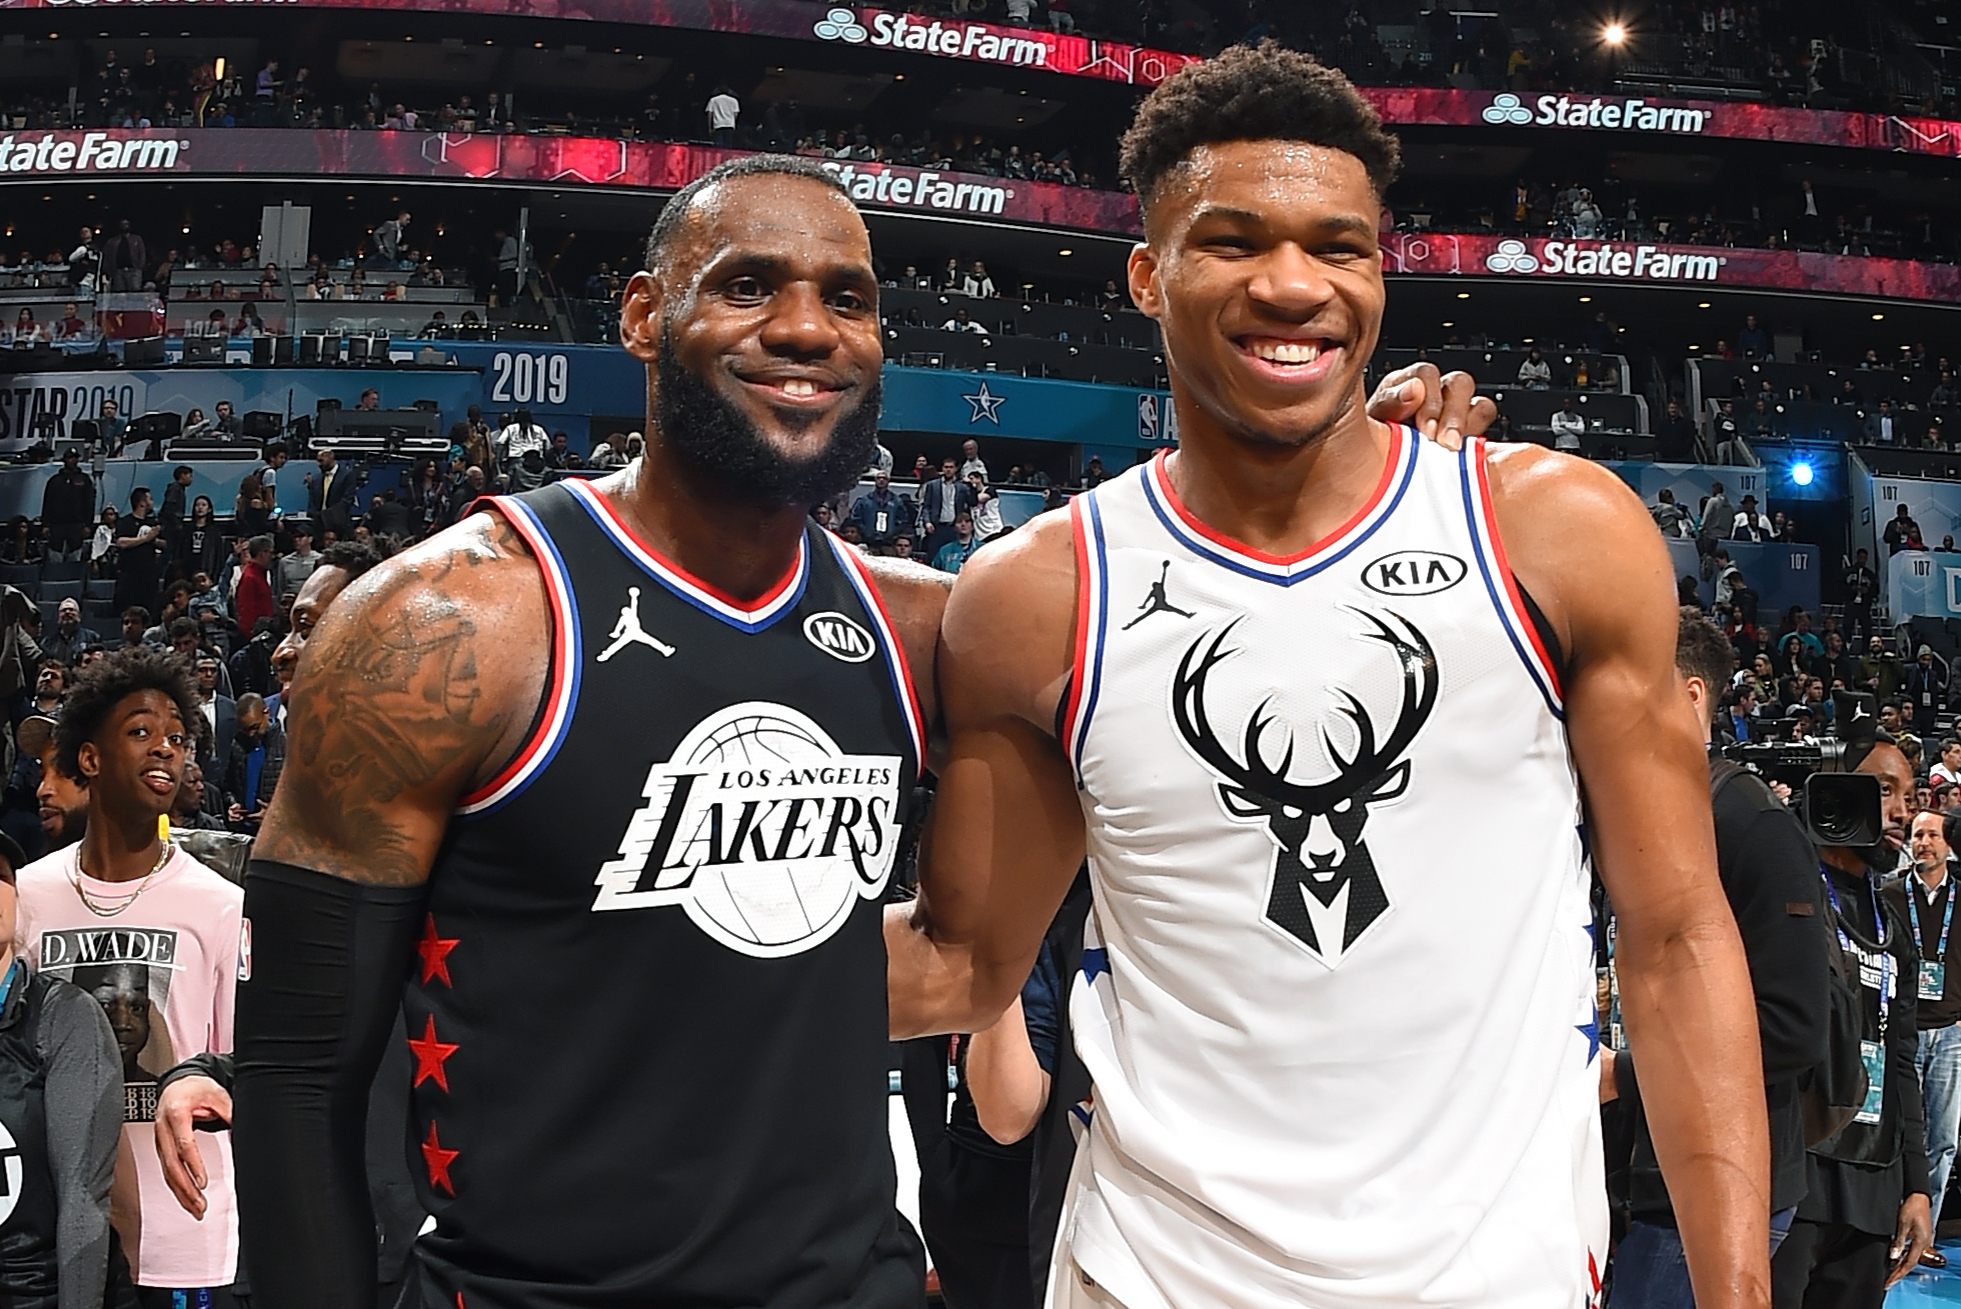 LeBron James exits early as Team Giannis wins NBA All-Star Game